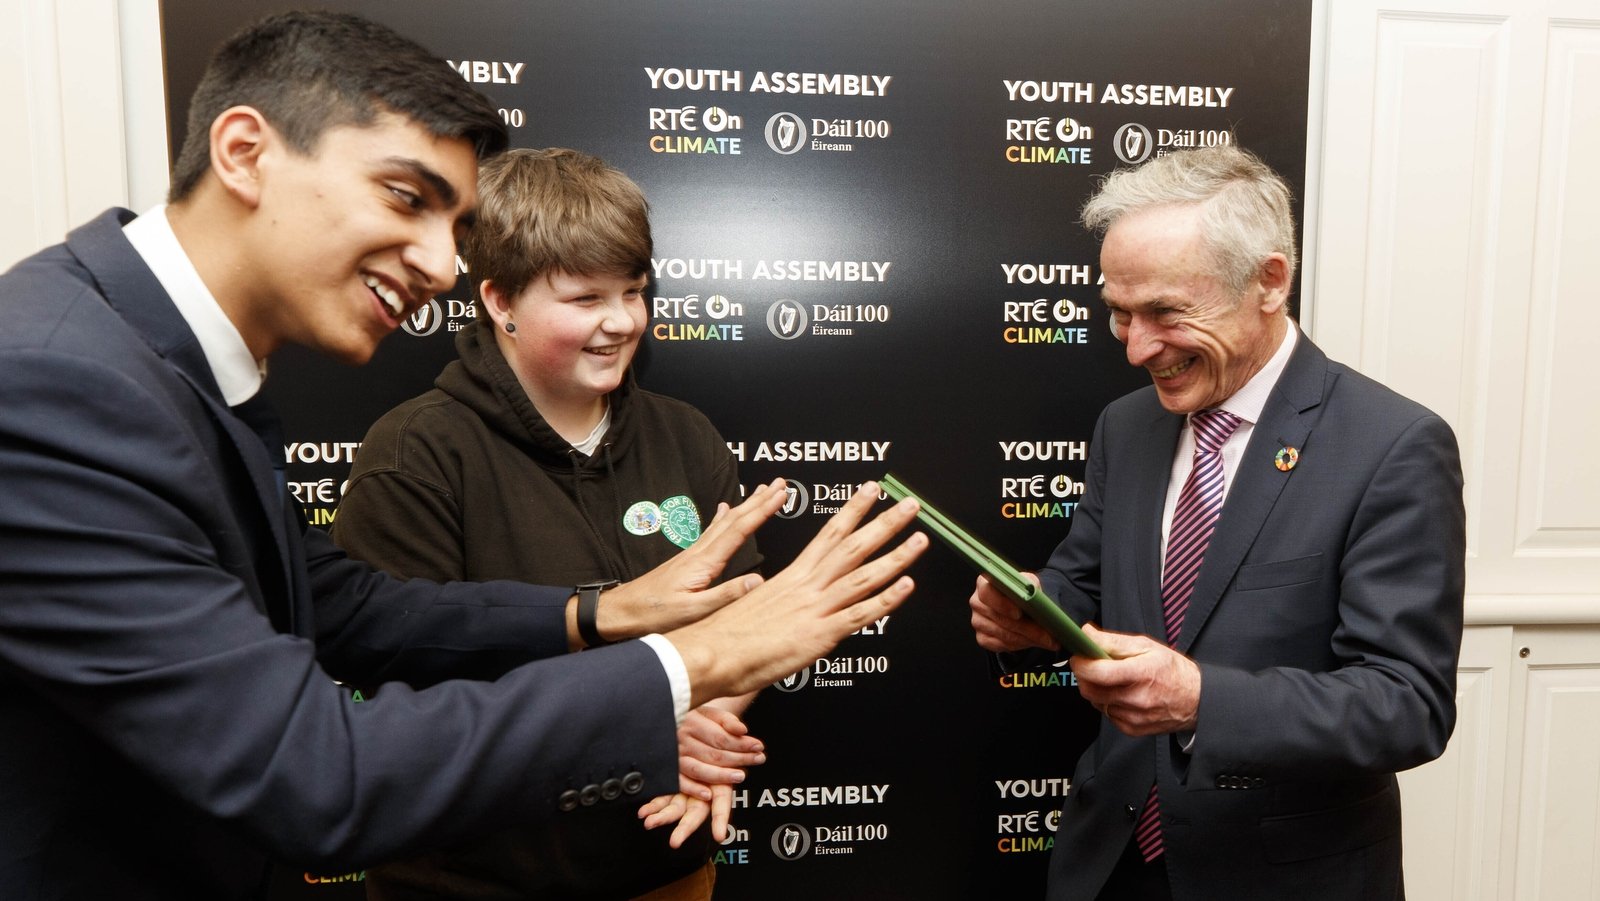 Minister presented with Youth Assembly recommendations - RTE.ie